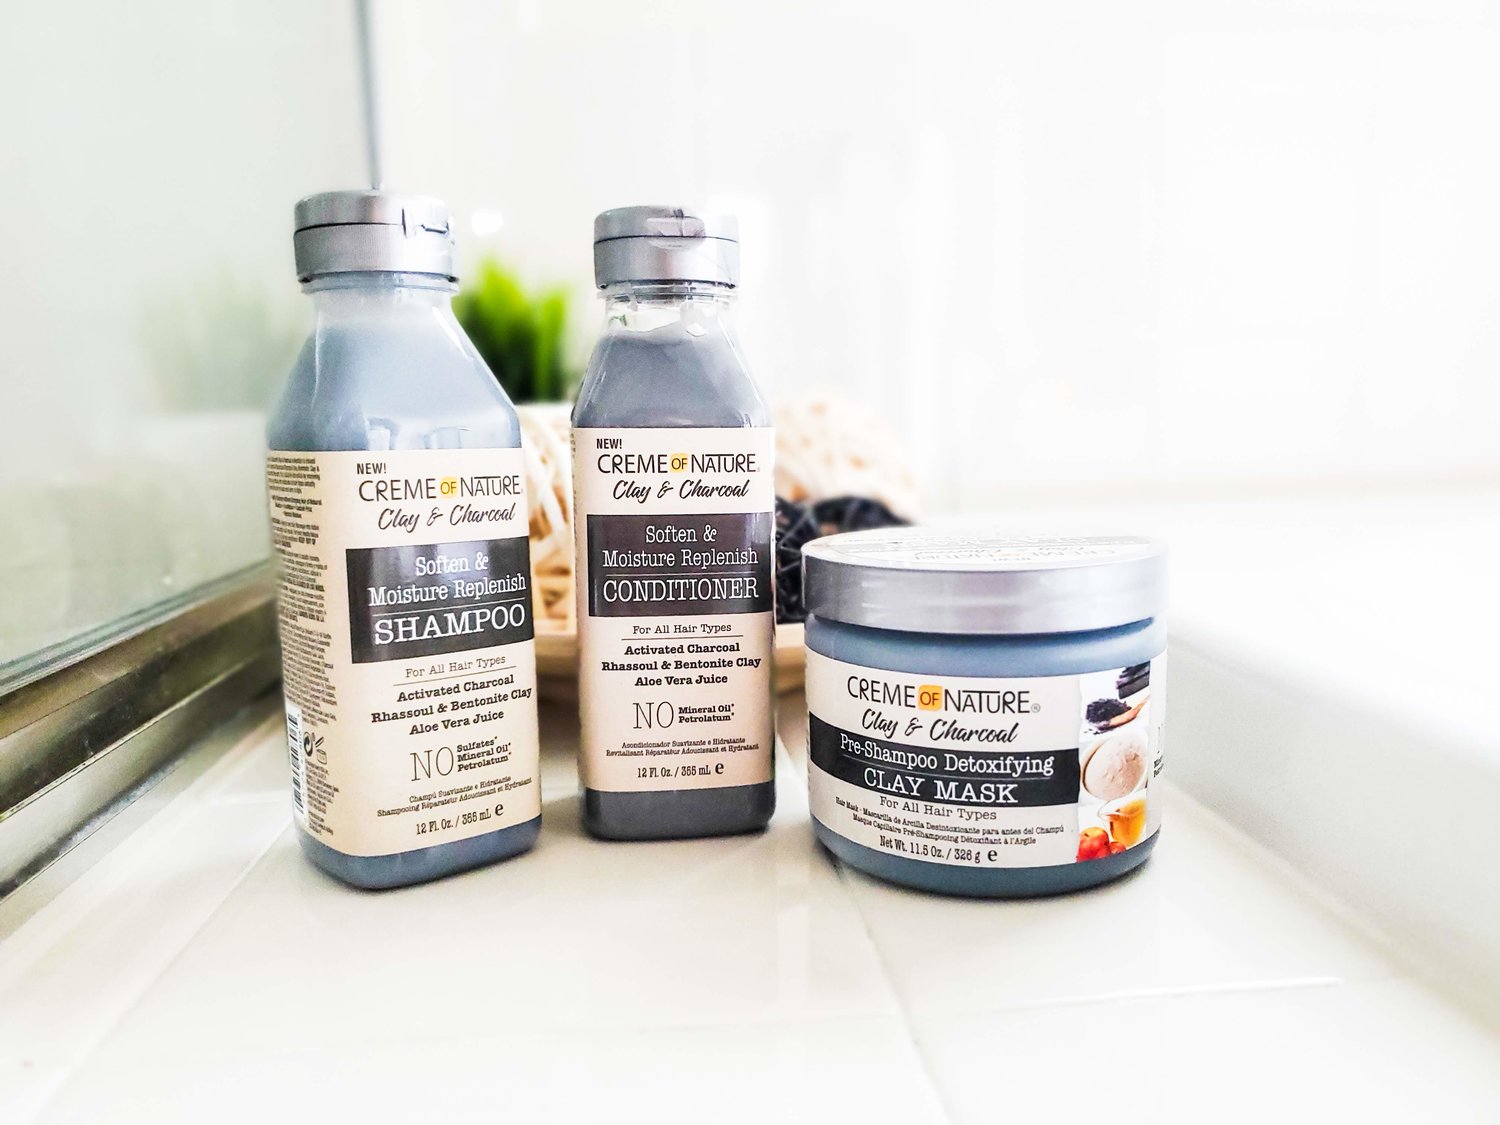 Benefits of clay mask for hair - Creme of Nature's New Clay and Charcoal Collection